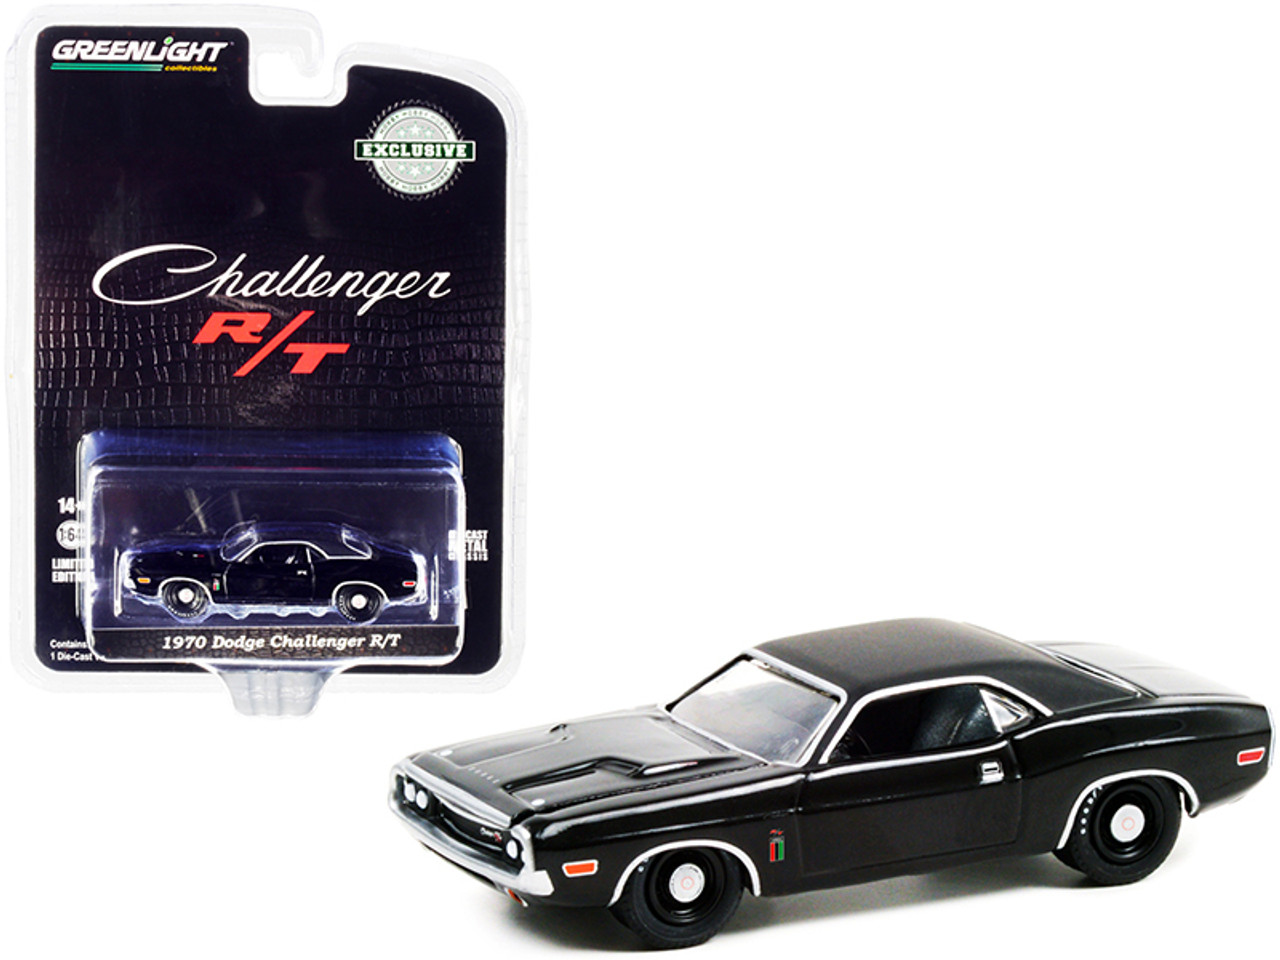 1970 Dodge Challenger R/T 426 HEMI "The Black Ghost" Black with Black Vinyl Top and White Tail Stripe "Hobby Exclusive" 1/64 Diecast Model Car by Greenlight